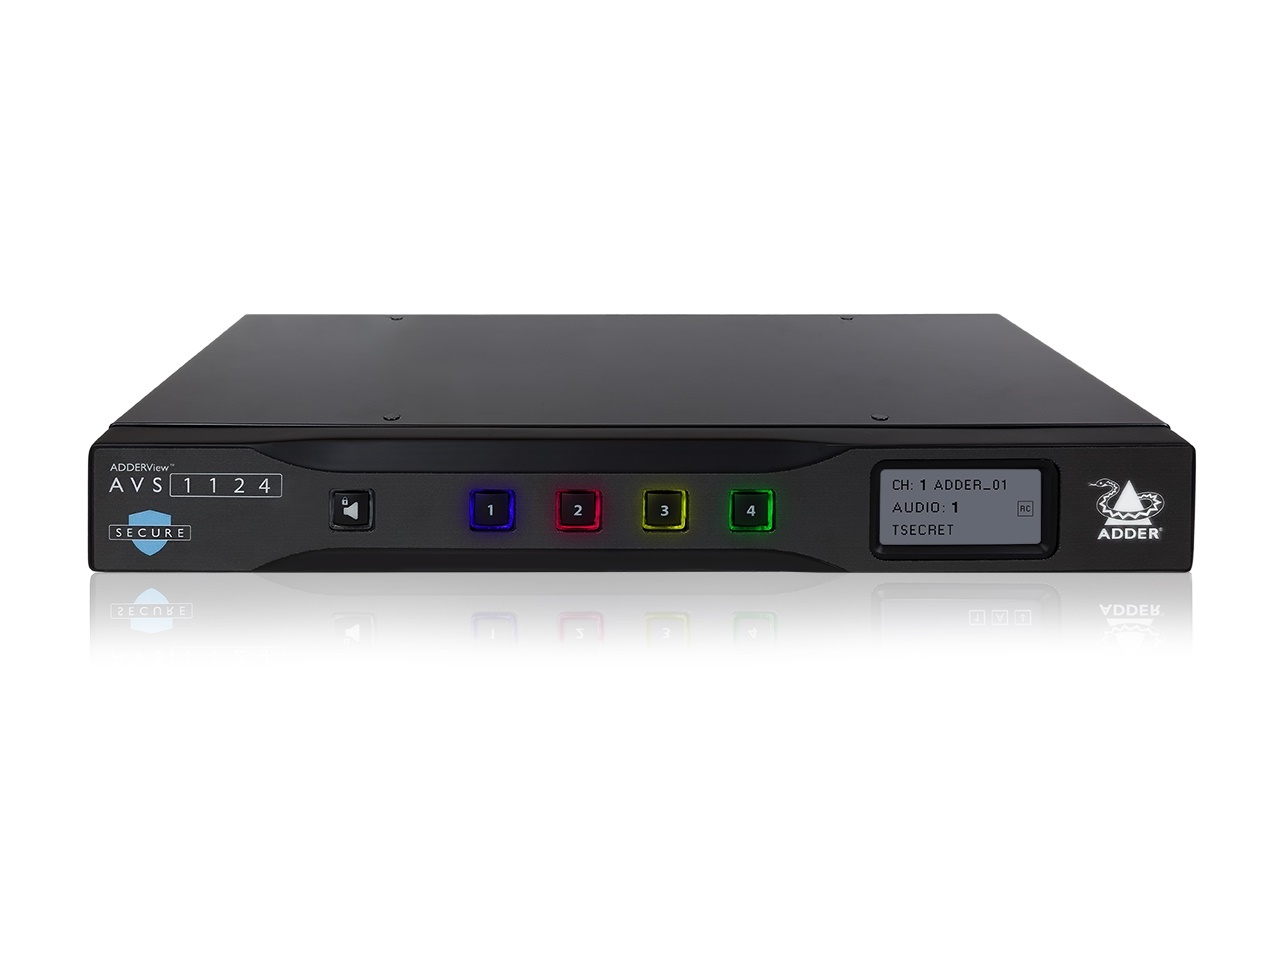 AVS-1124 ADDERView Secure 4-Port Multi-Viewer Switch with UHD 4K Video Output by Adder